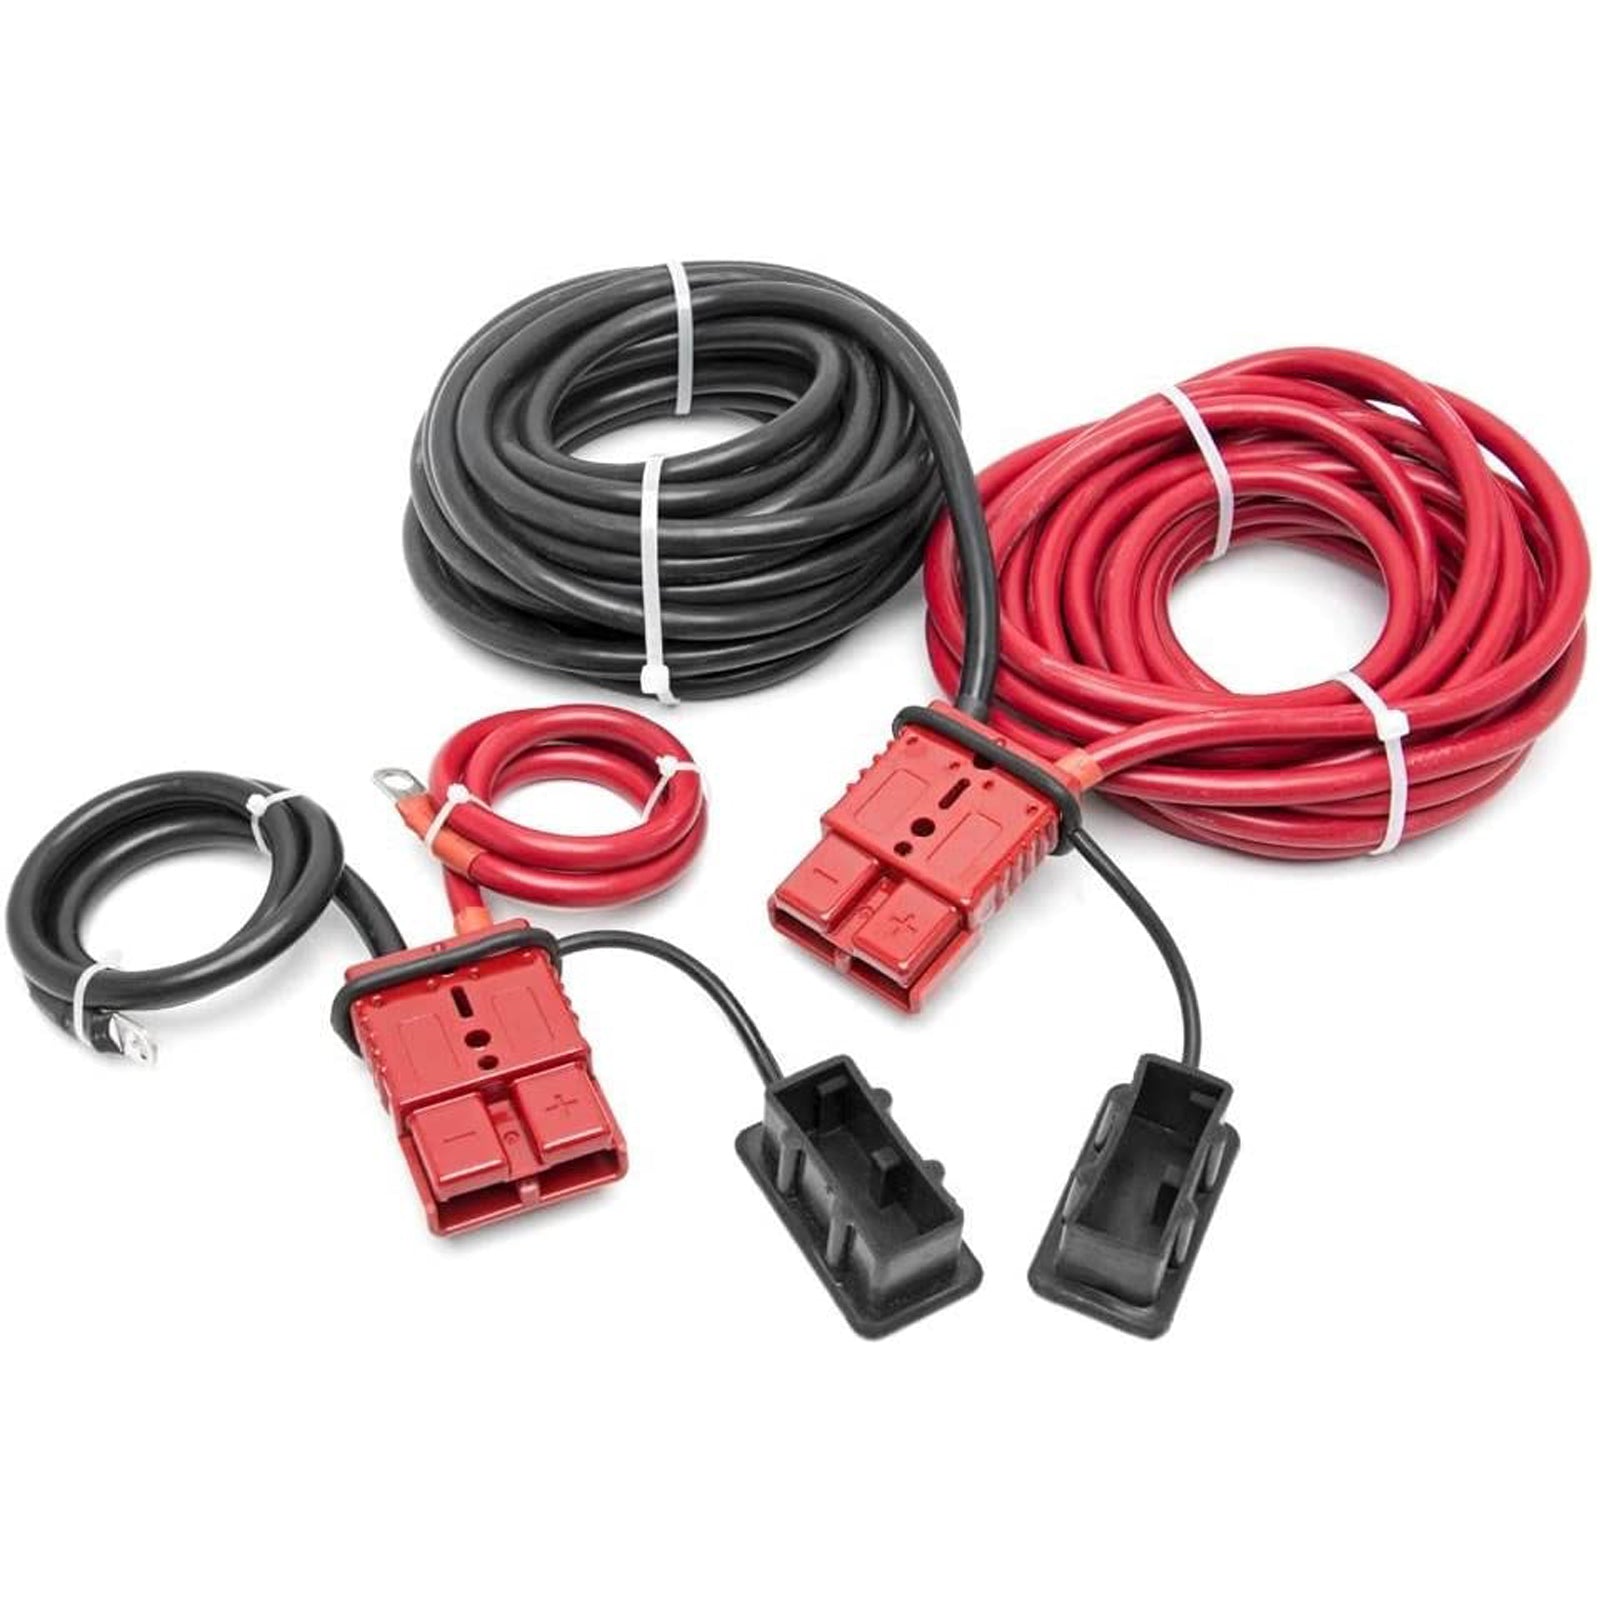 OPENROAD WINCH POWER CABLE QUICK DISCONNECT | 24 FT  openroad4wd.com   